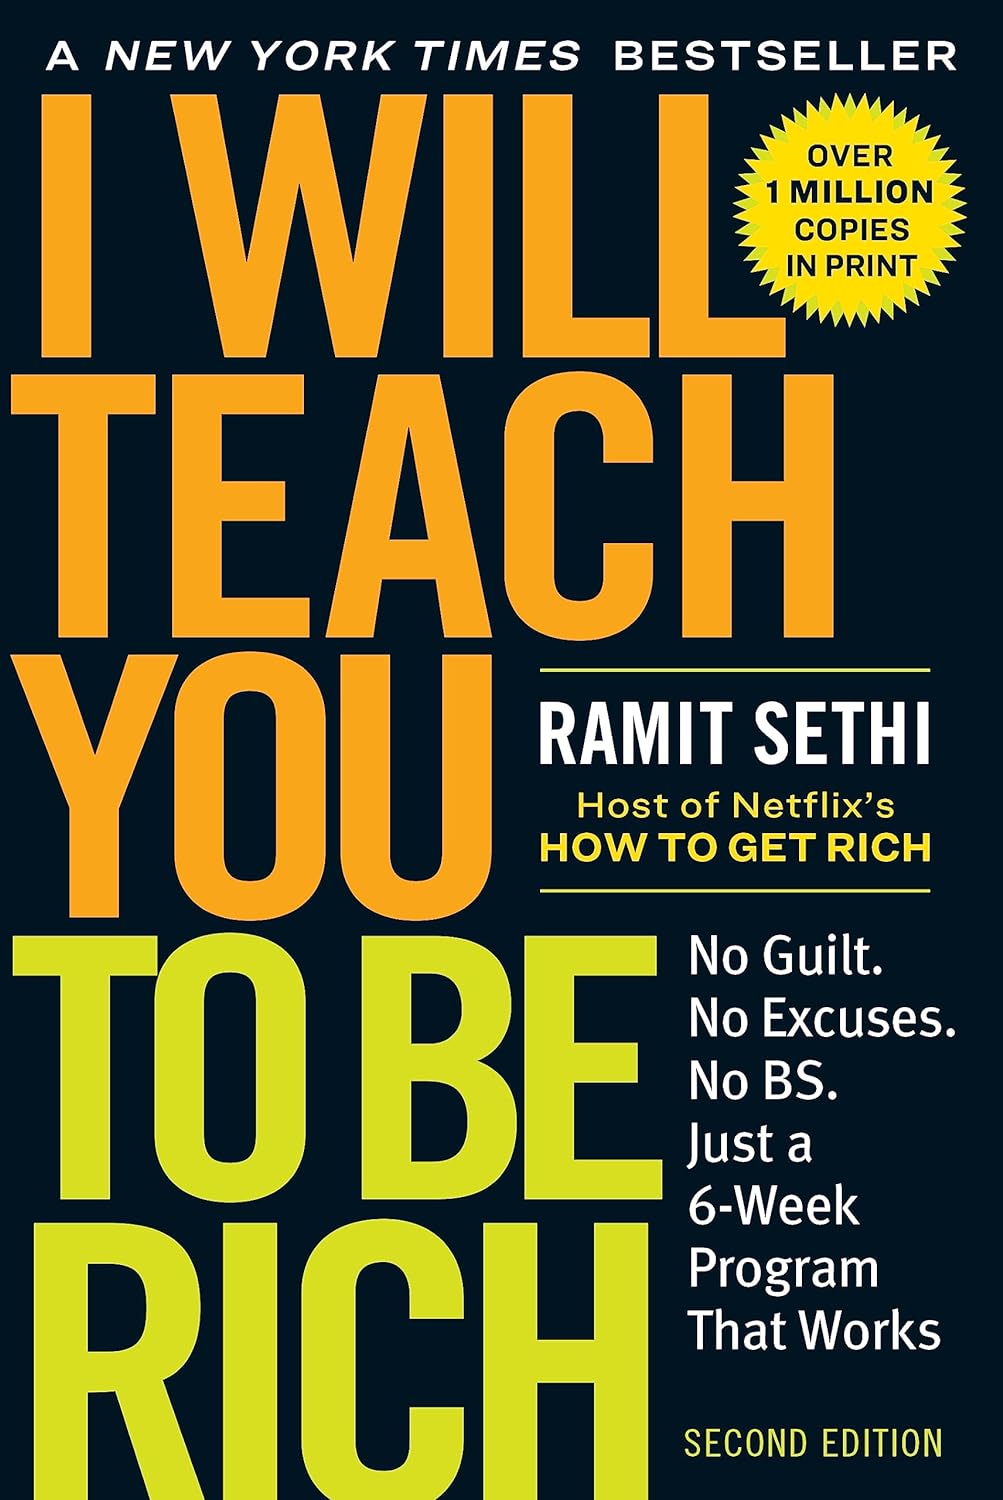 financial strategies | I Will Teach You to Be Rich: No Guilt. No Excuses. No B.S. Just a 6-Week Program That Works, by Ramit Sethi